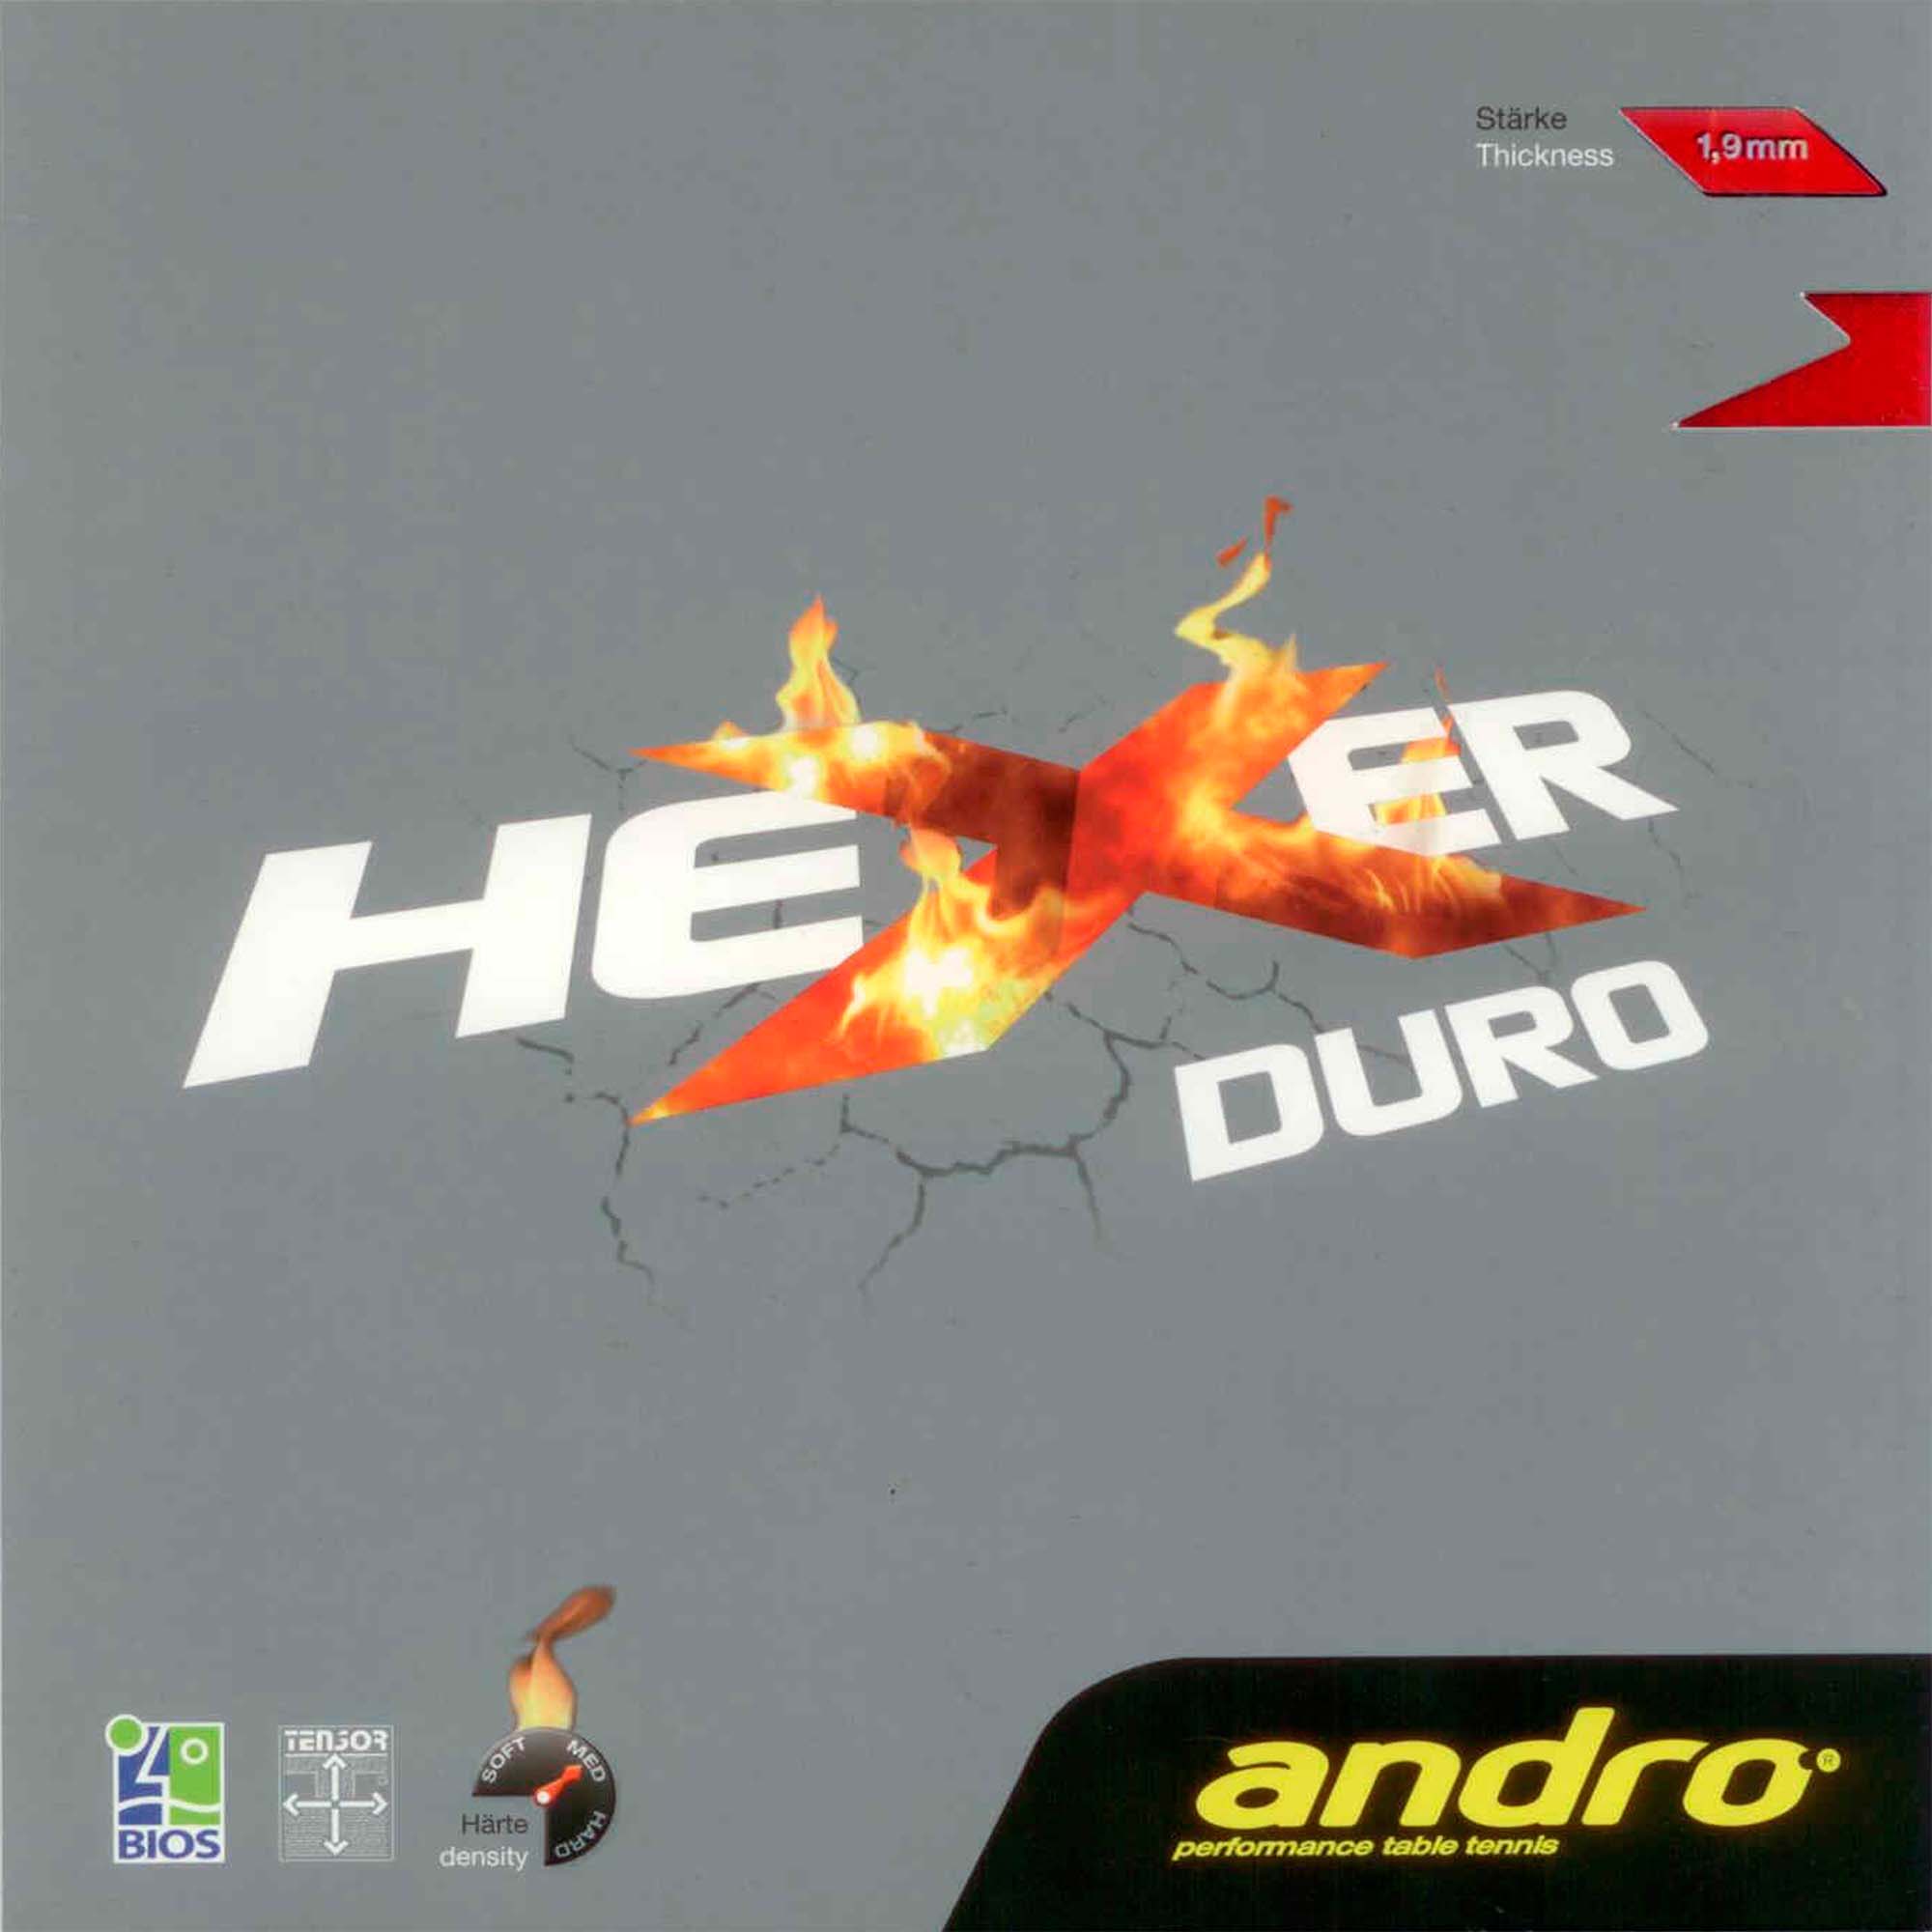 andro Rubber Hexer Duro